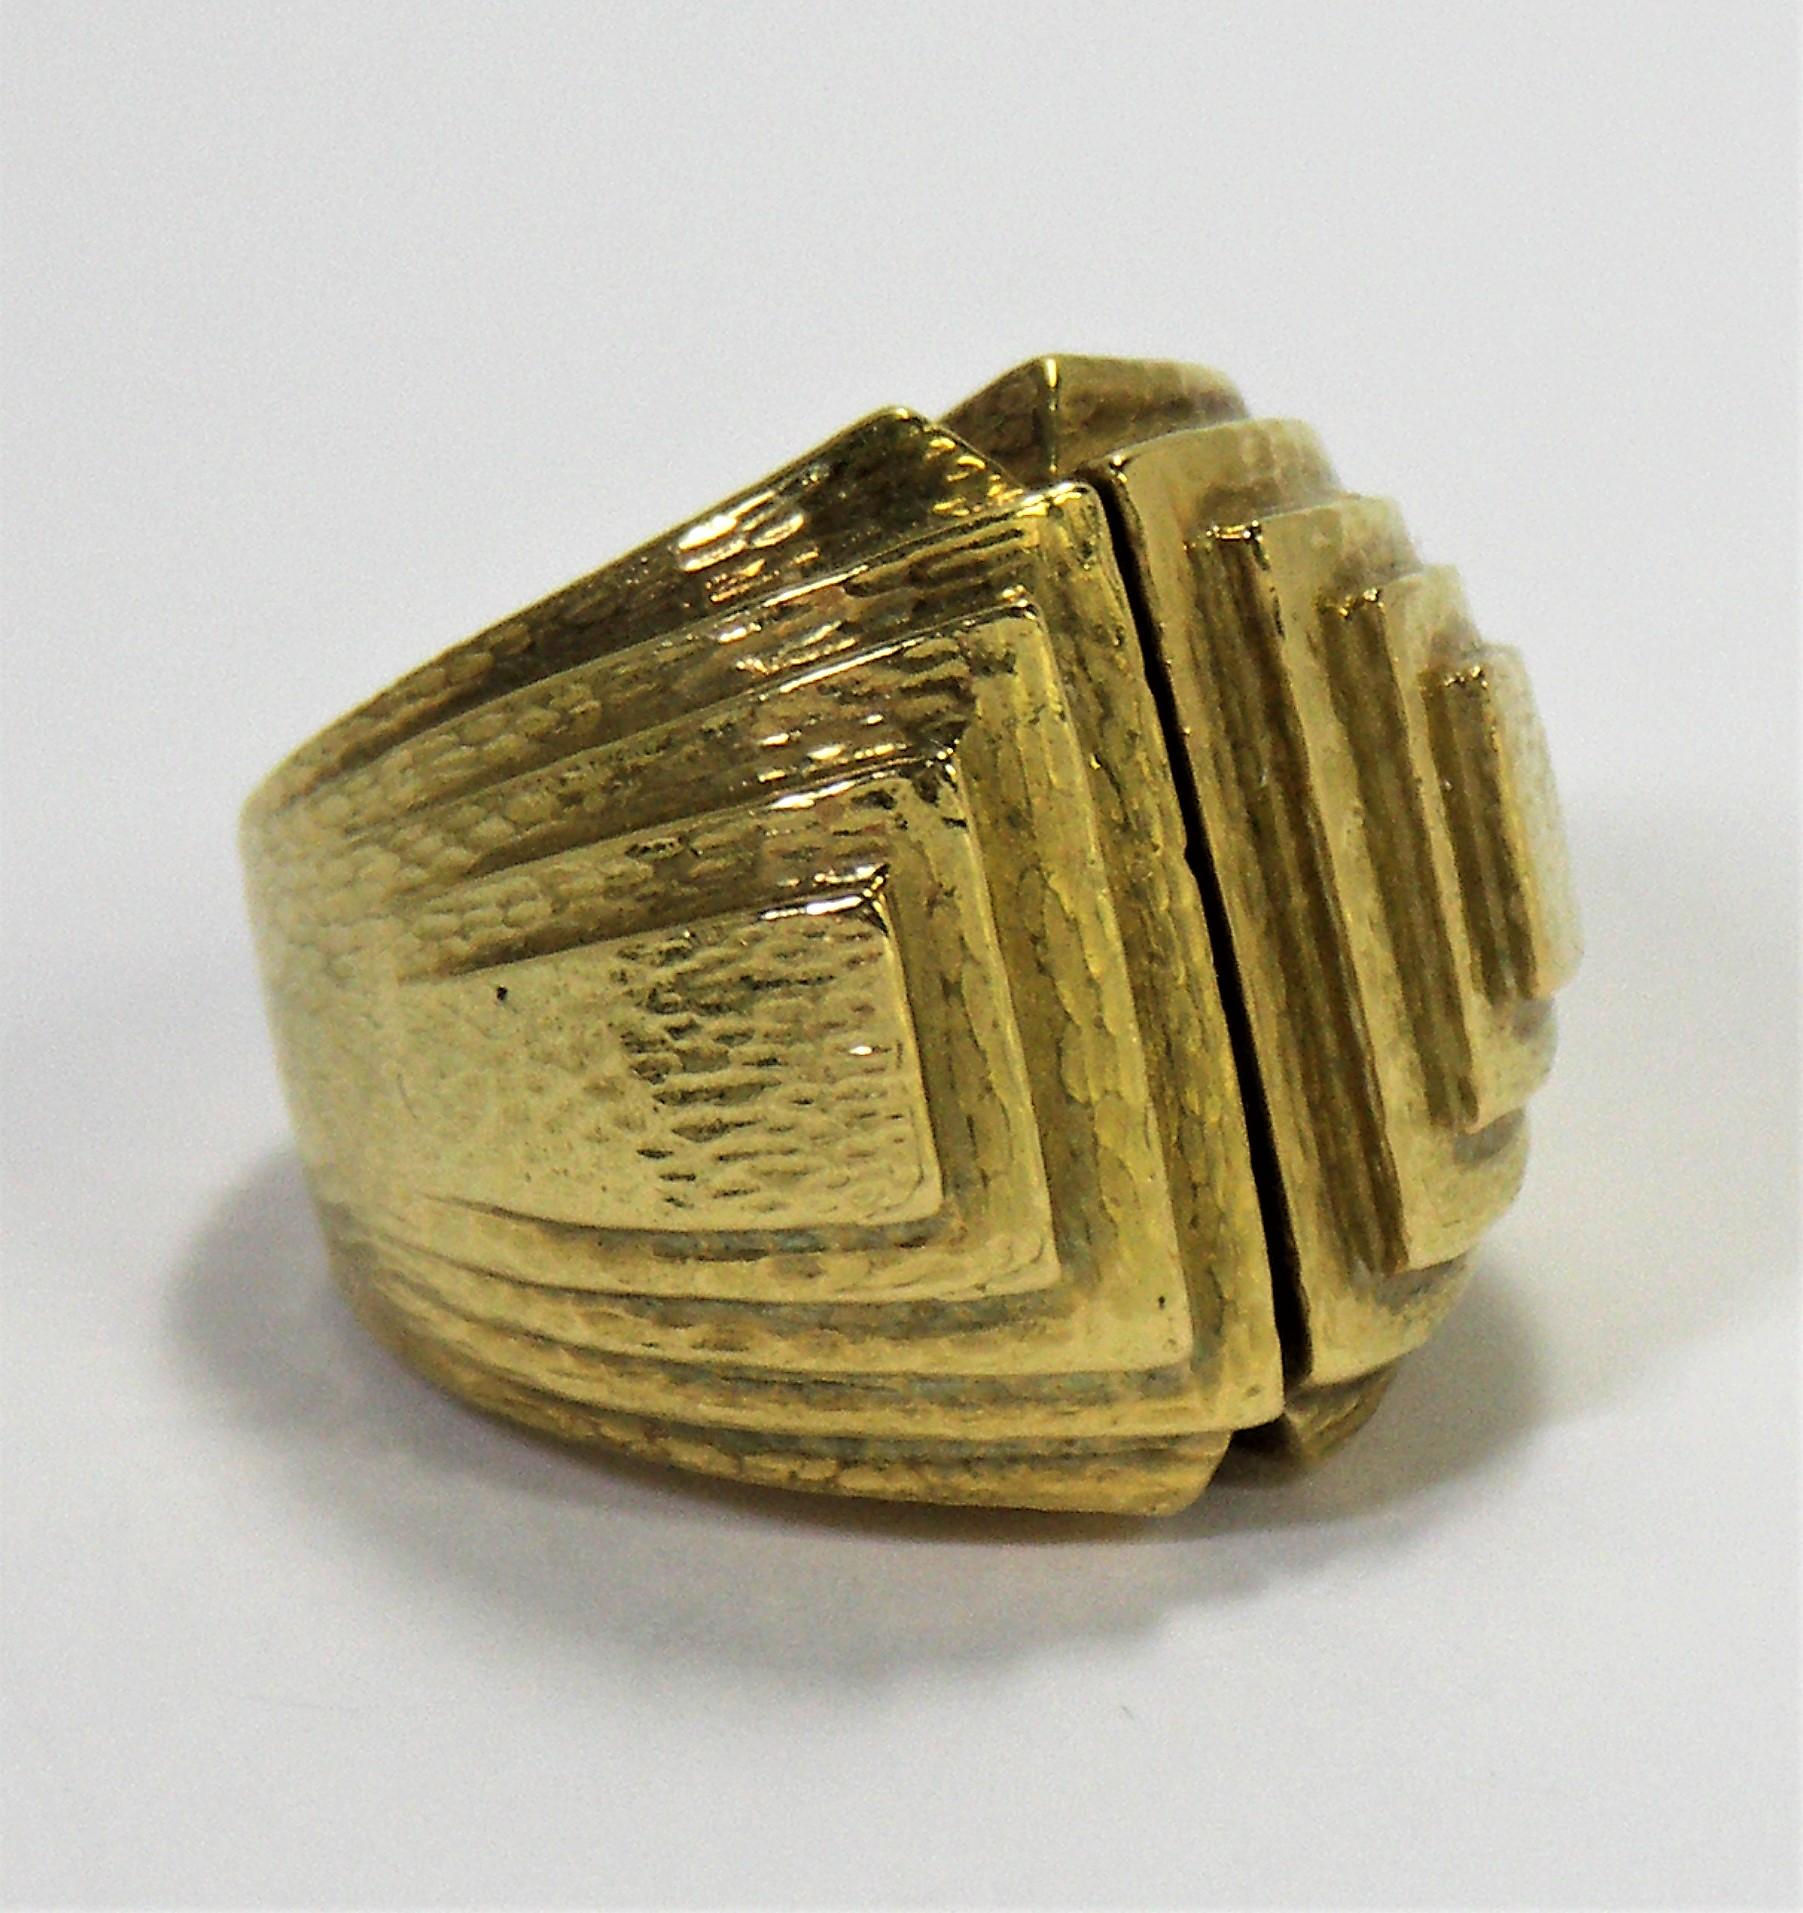 A striking 18K Yellow Gold David Webb ring from the mid 1970s. The hammered gold, geometric
design stands the test of time. This is one of David Webb's large, but not huge rings, measuring
1 inch wide (left to right) and just under 1 inch (15/16